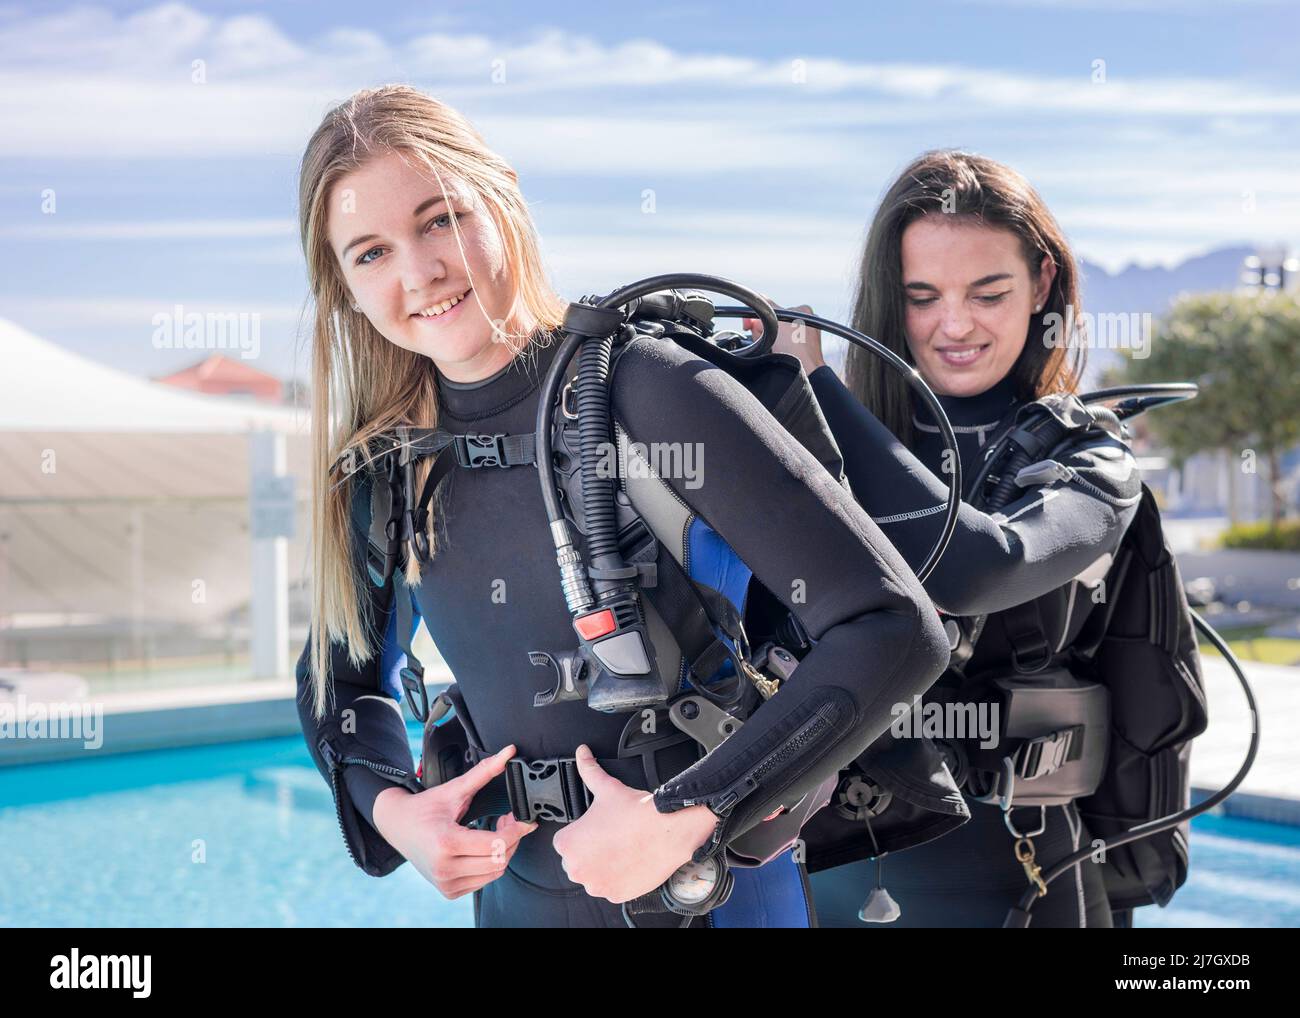 Scuba divers helping each other to put their gear on next to a pool Stock Photo